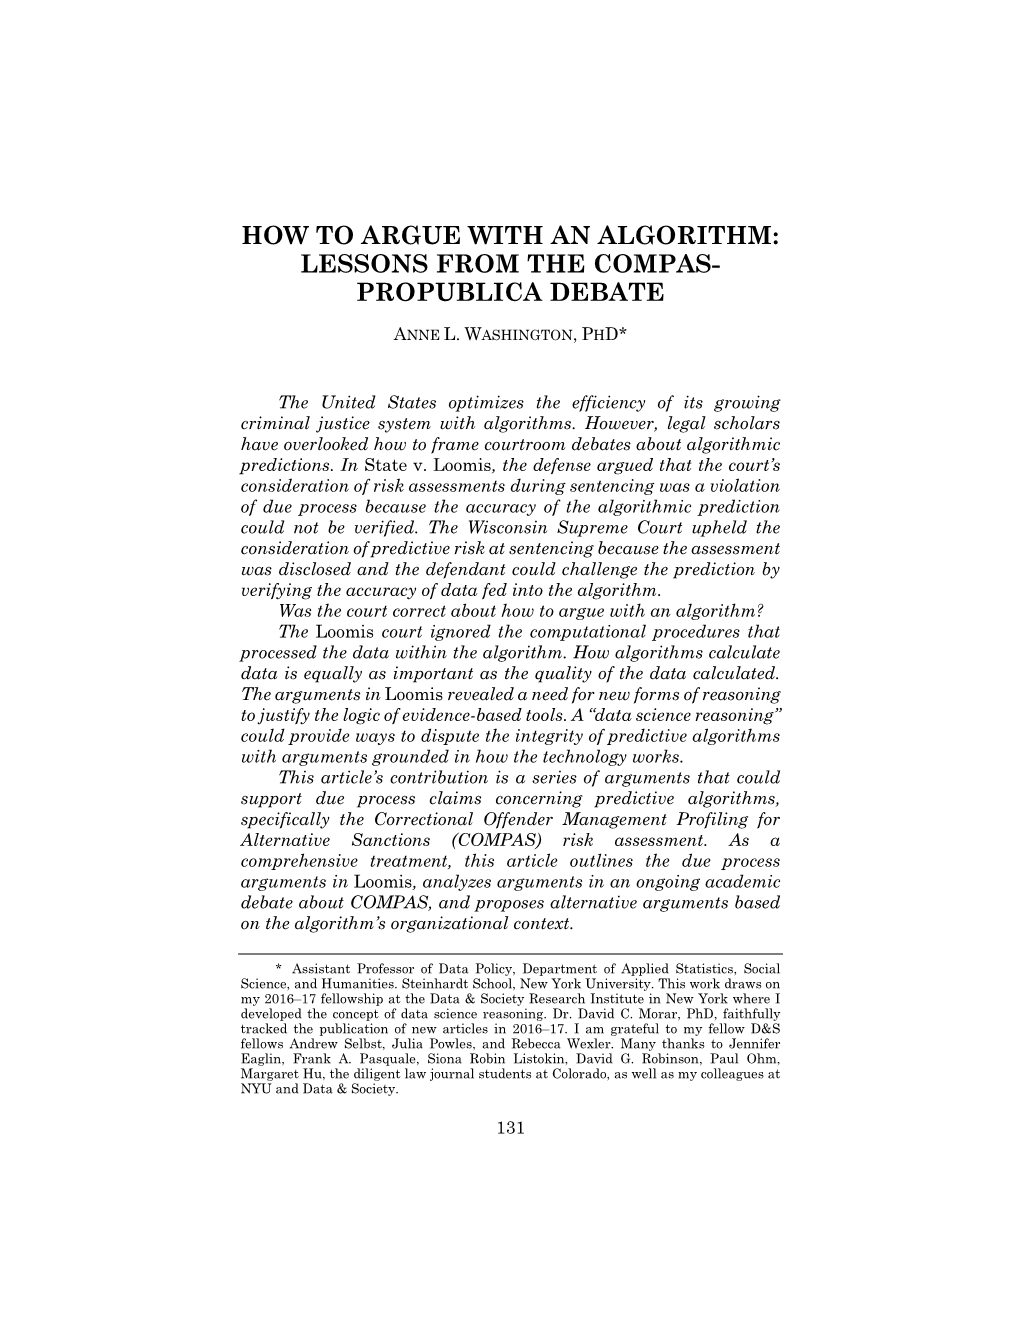 How to Argue with an Algorithm: Lessons from the Compas- Propublica Debate